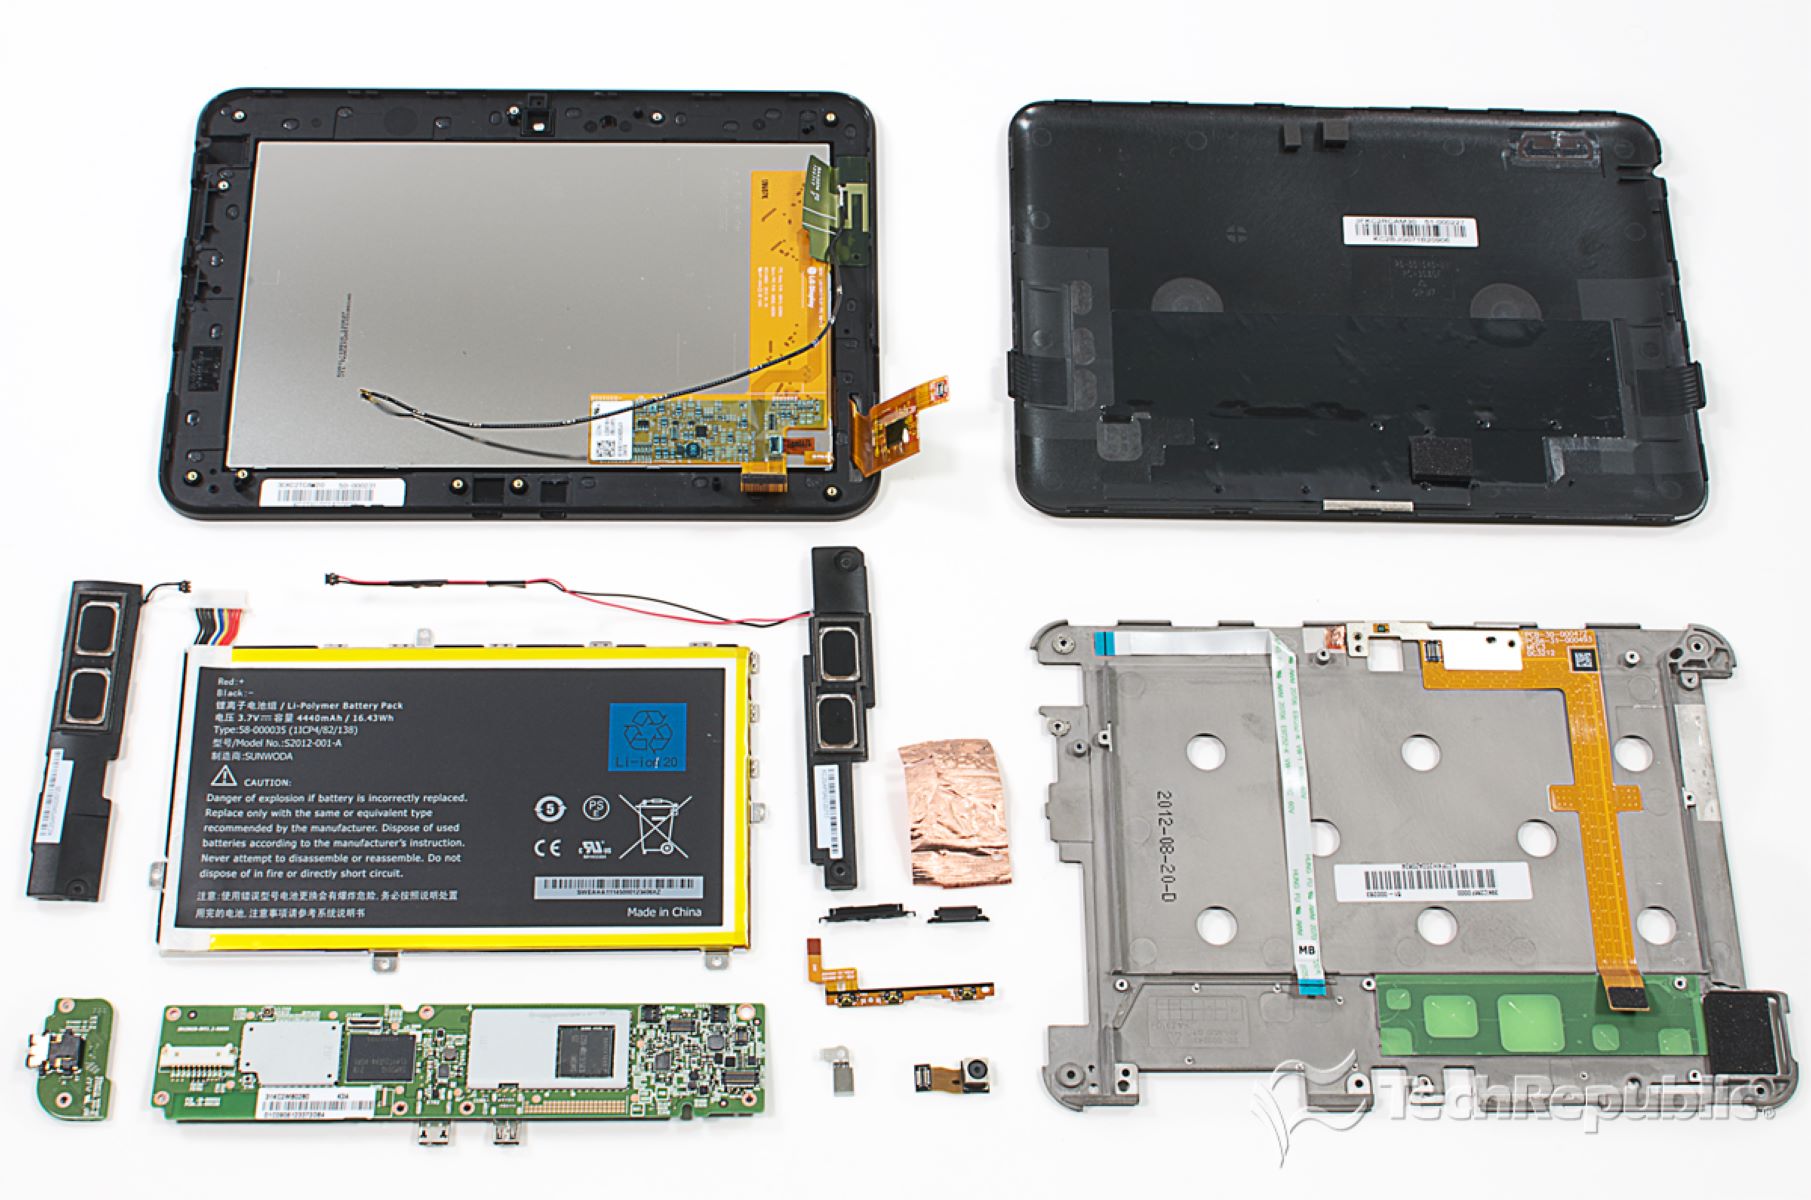 How To Open A Kindle Fire